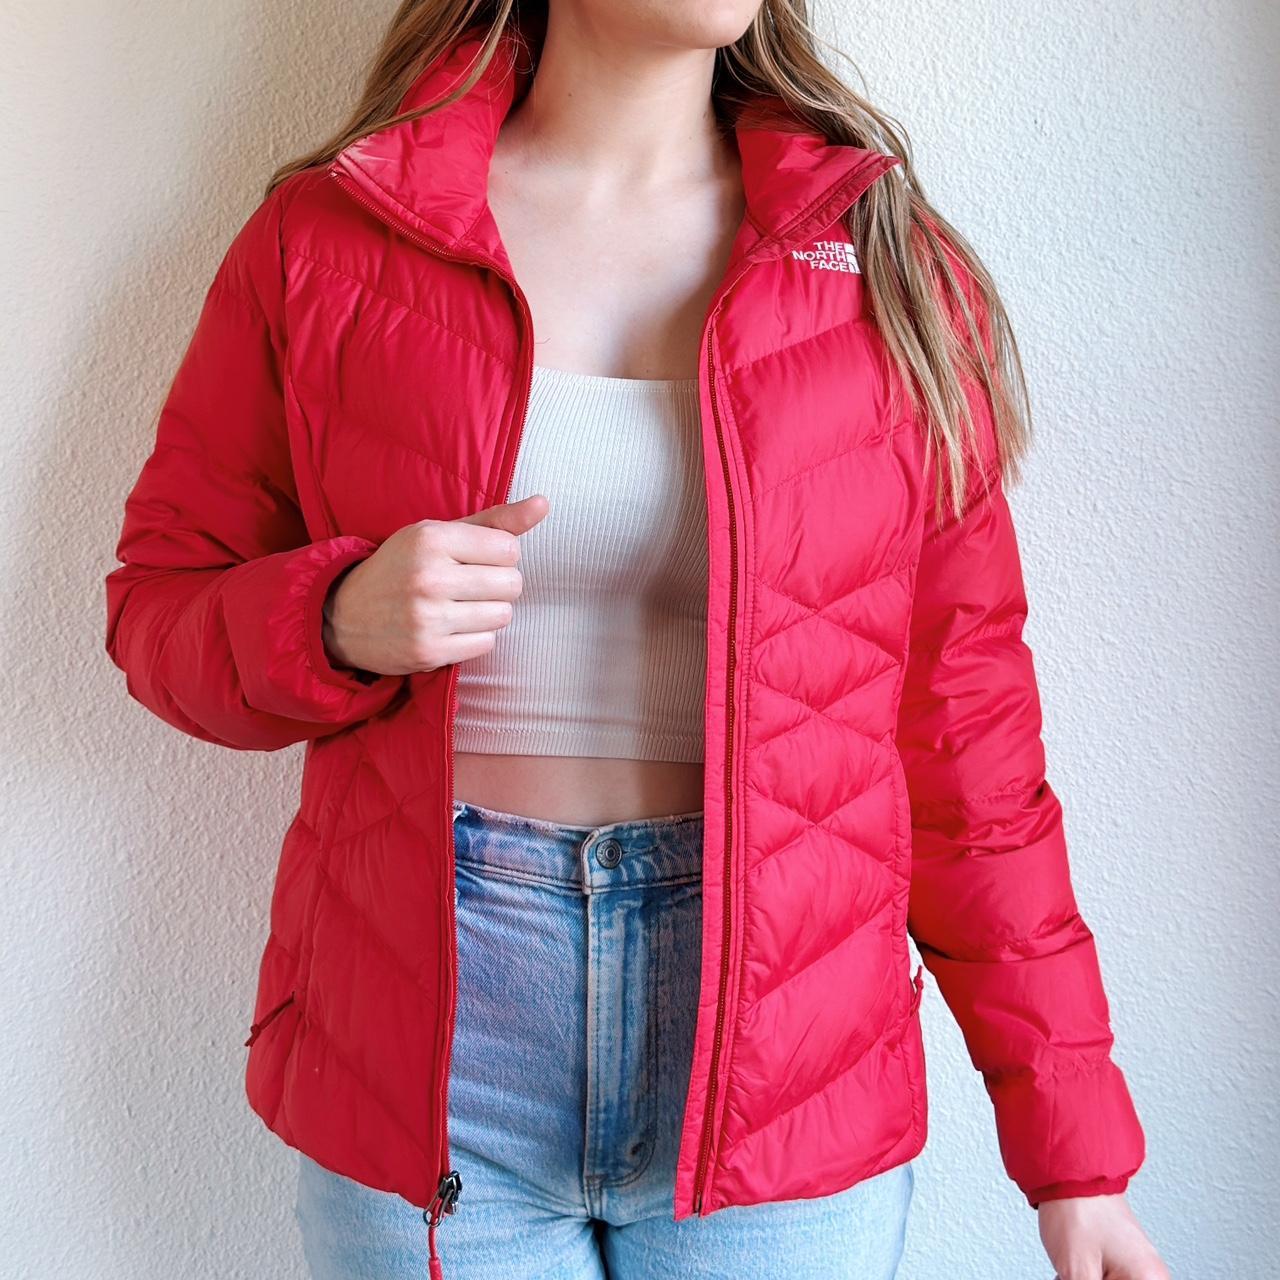 The North Face Women's Red Coat (2)